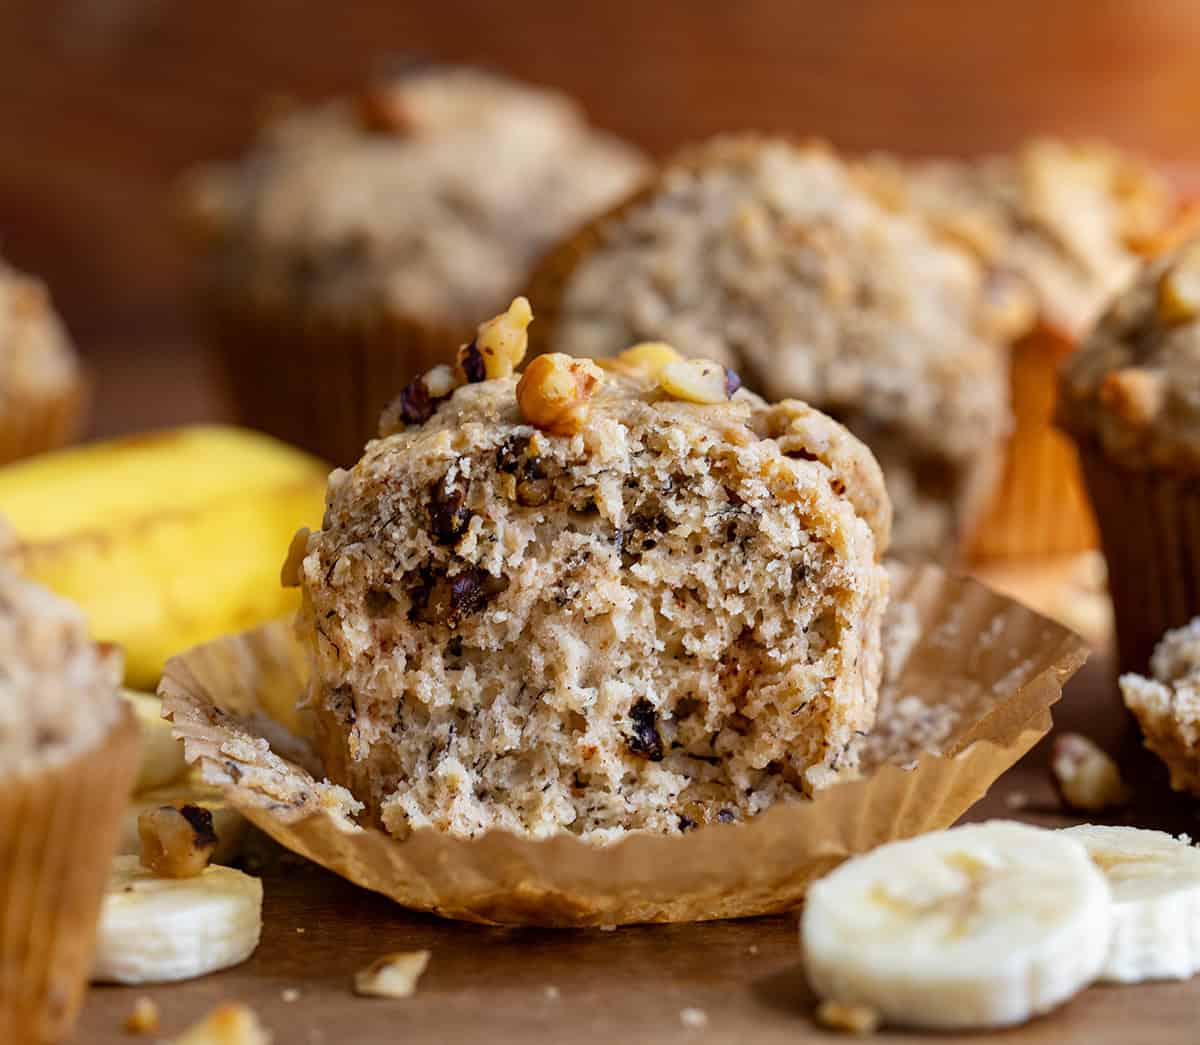 Banana Nut Muffins on a wooden table with the center muffin cut in half showing inside texture.